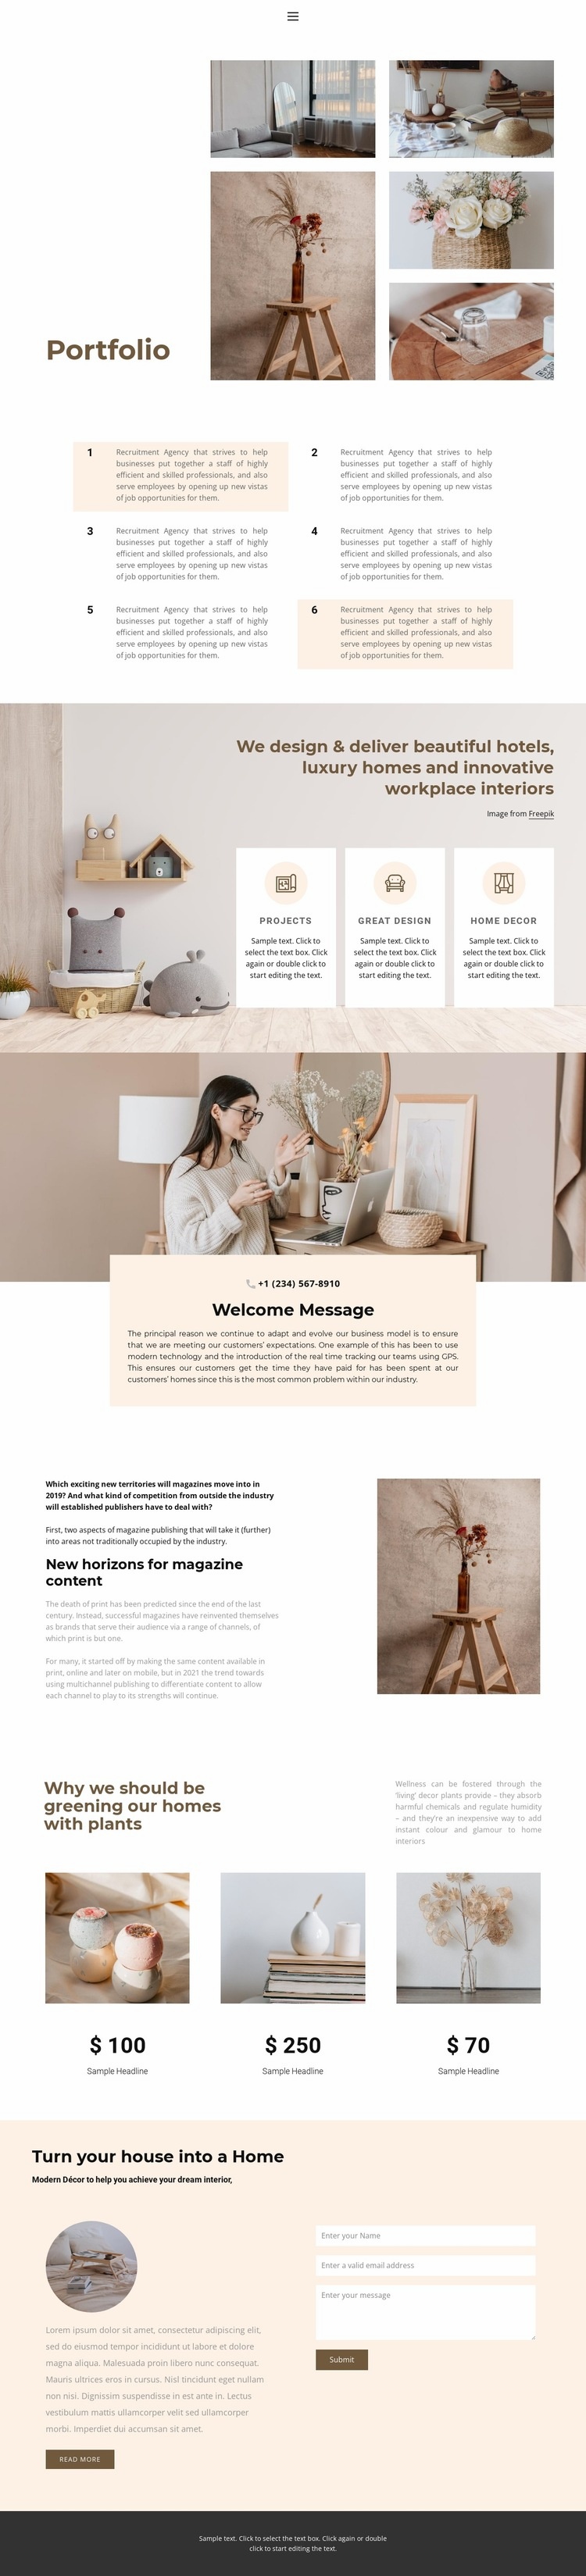 Decorate your home Webflow Template Alternative